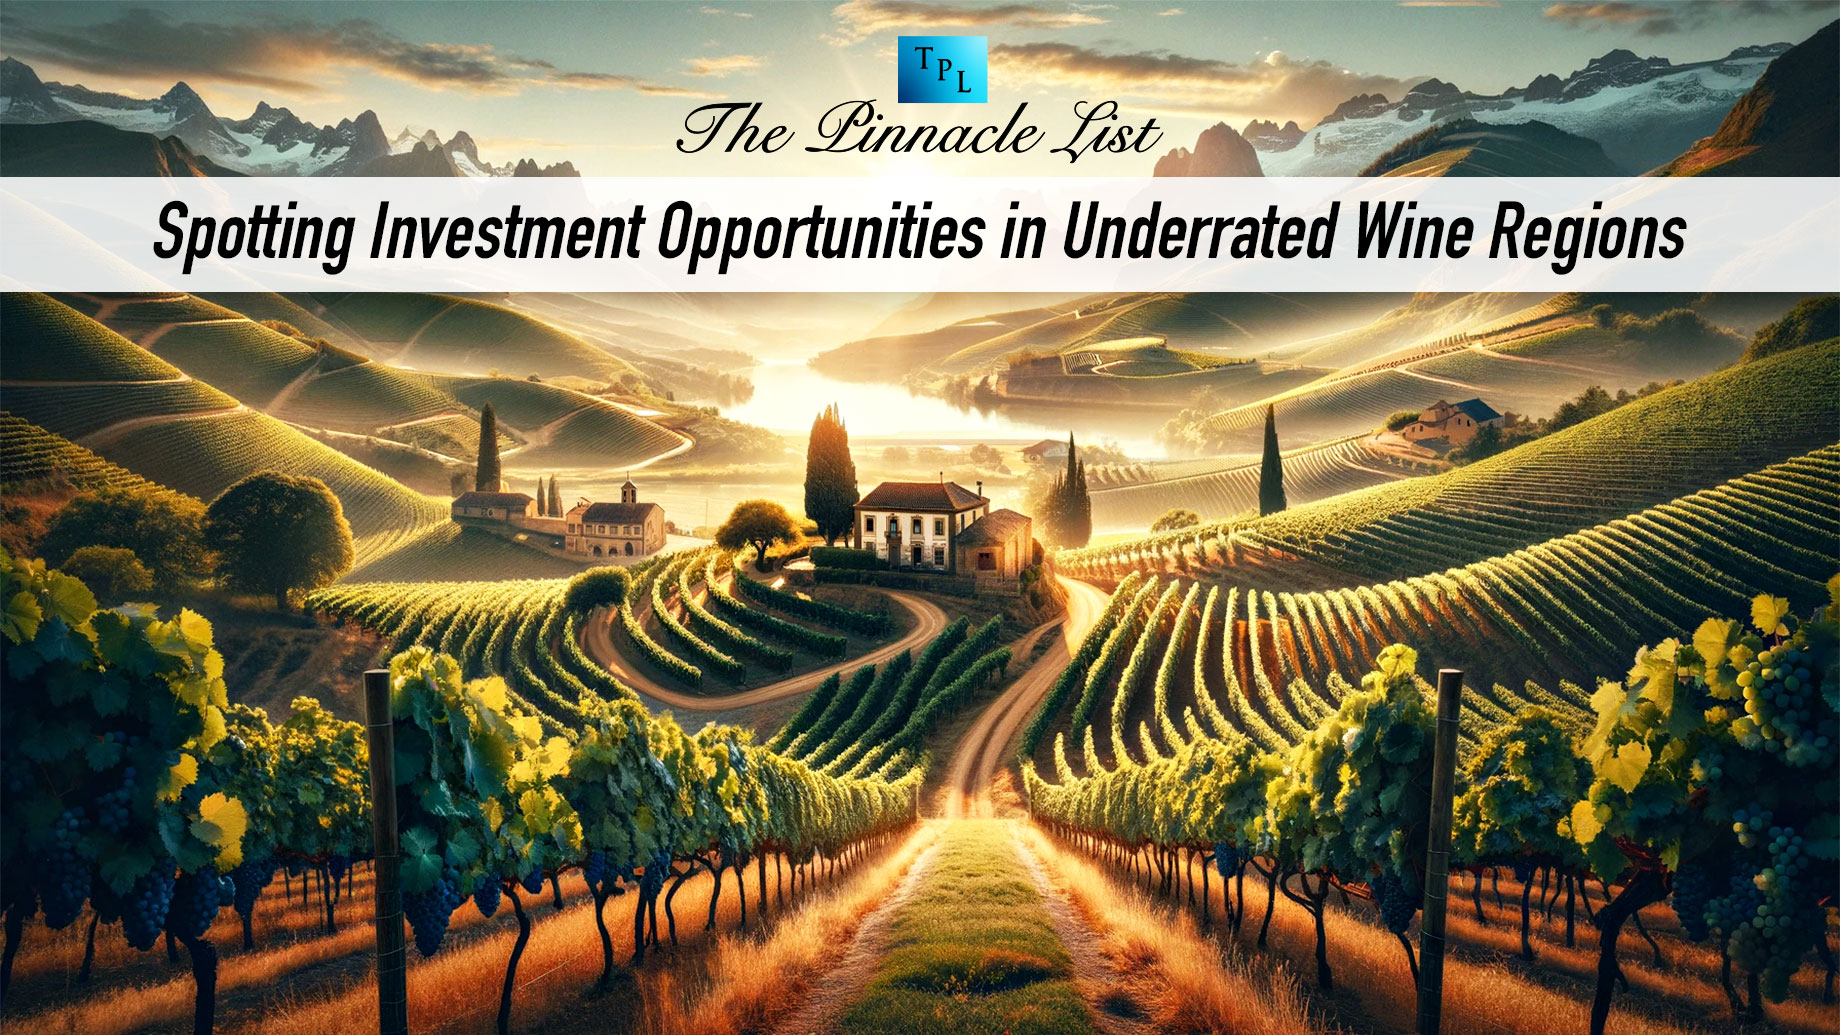 Spotting Investment Opportunities in Underrated Wine Regions